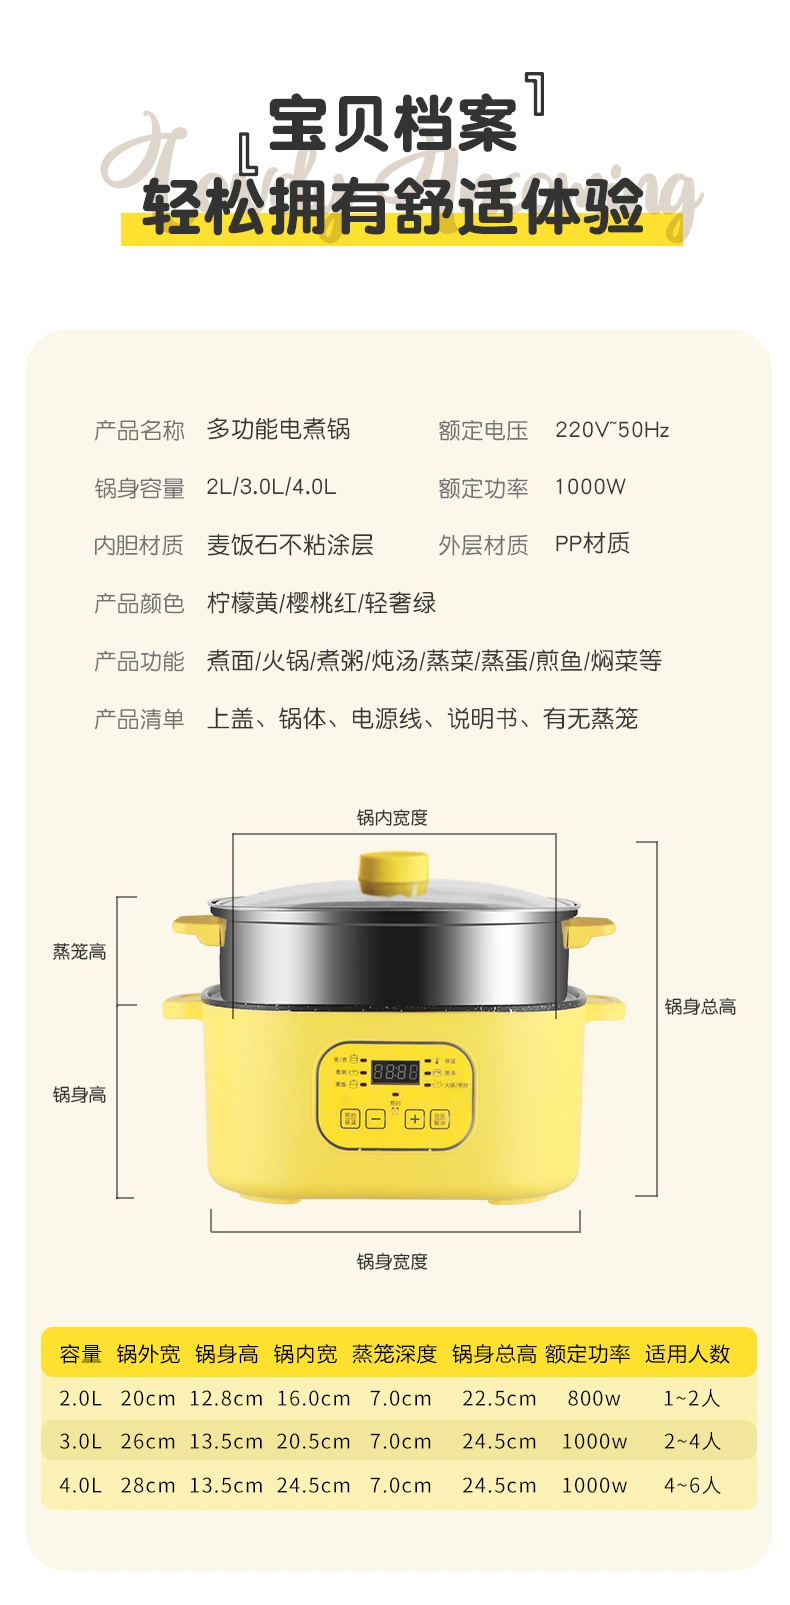 Xbc-30 Square Double Mechanical Single-Layer Electric Cooking Pot, Electric Steamer, Electric Frying Pan